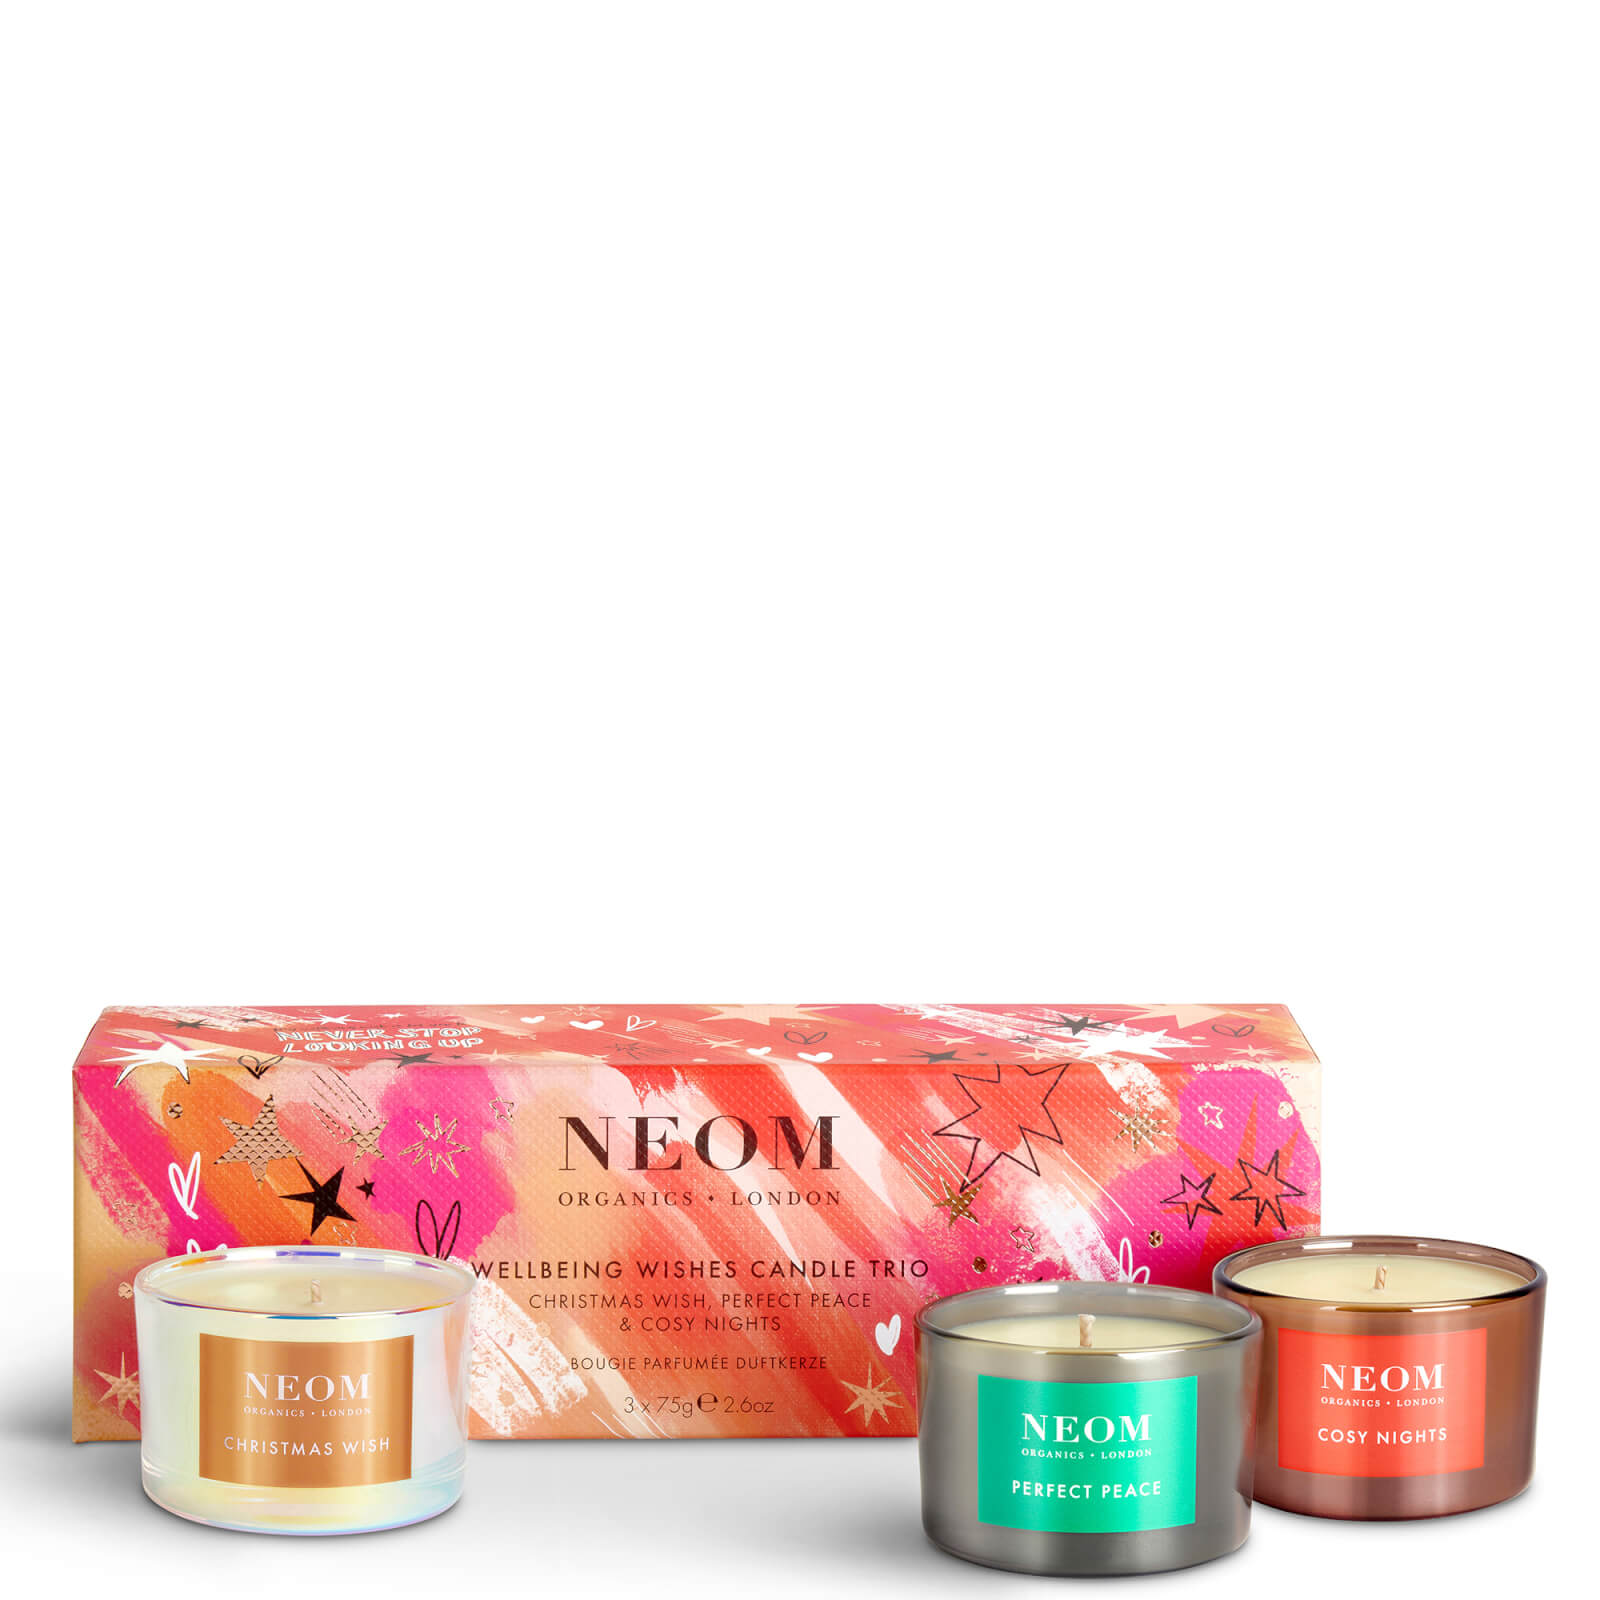 NEOM Wellbeing Wishes Candle Trio (Worth £57.00)